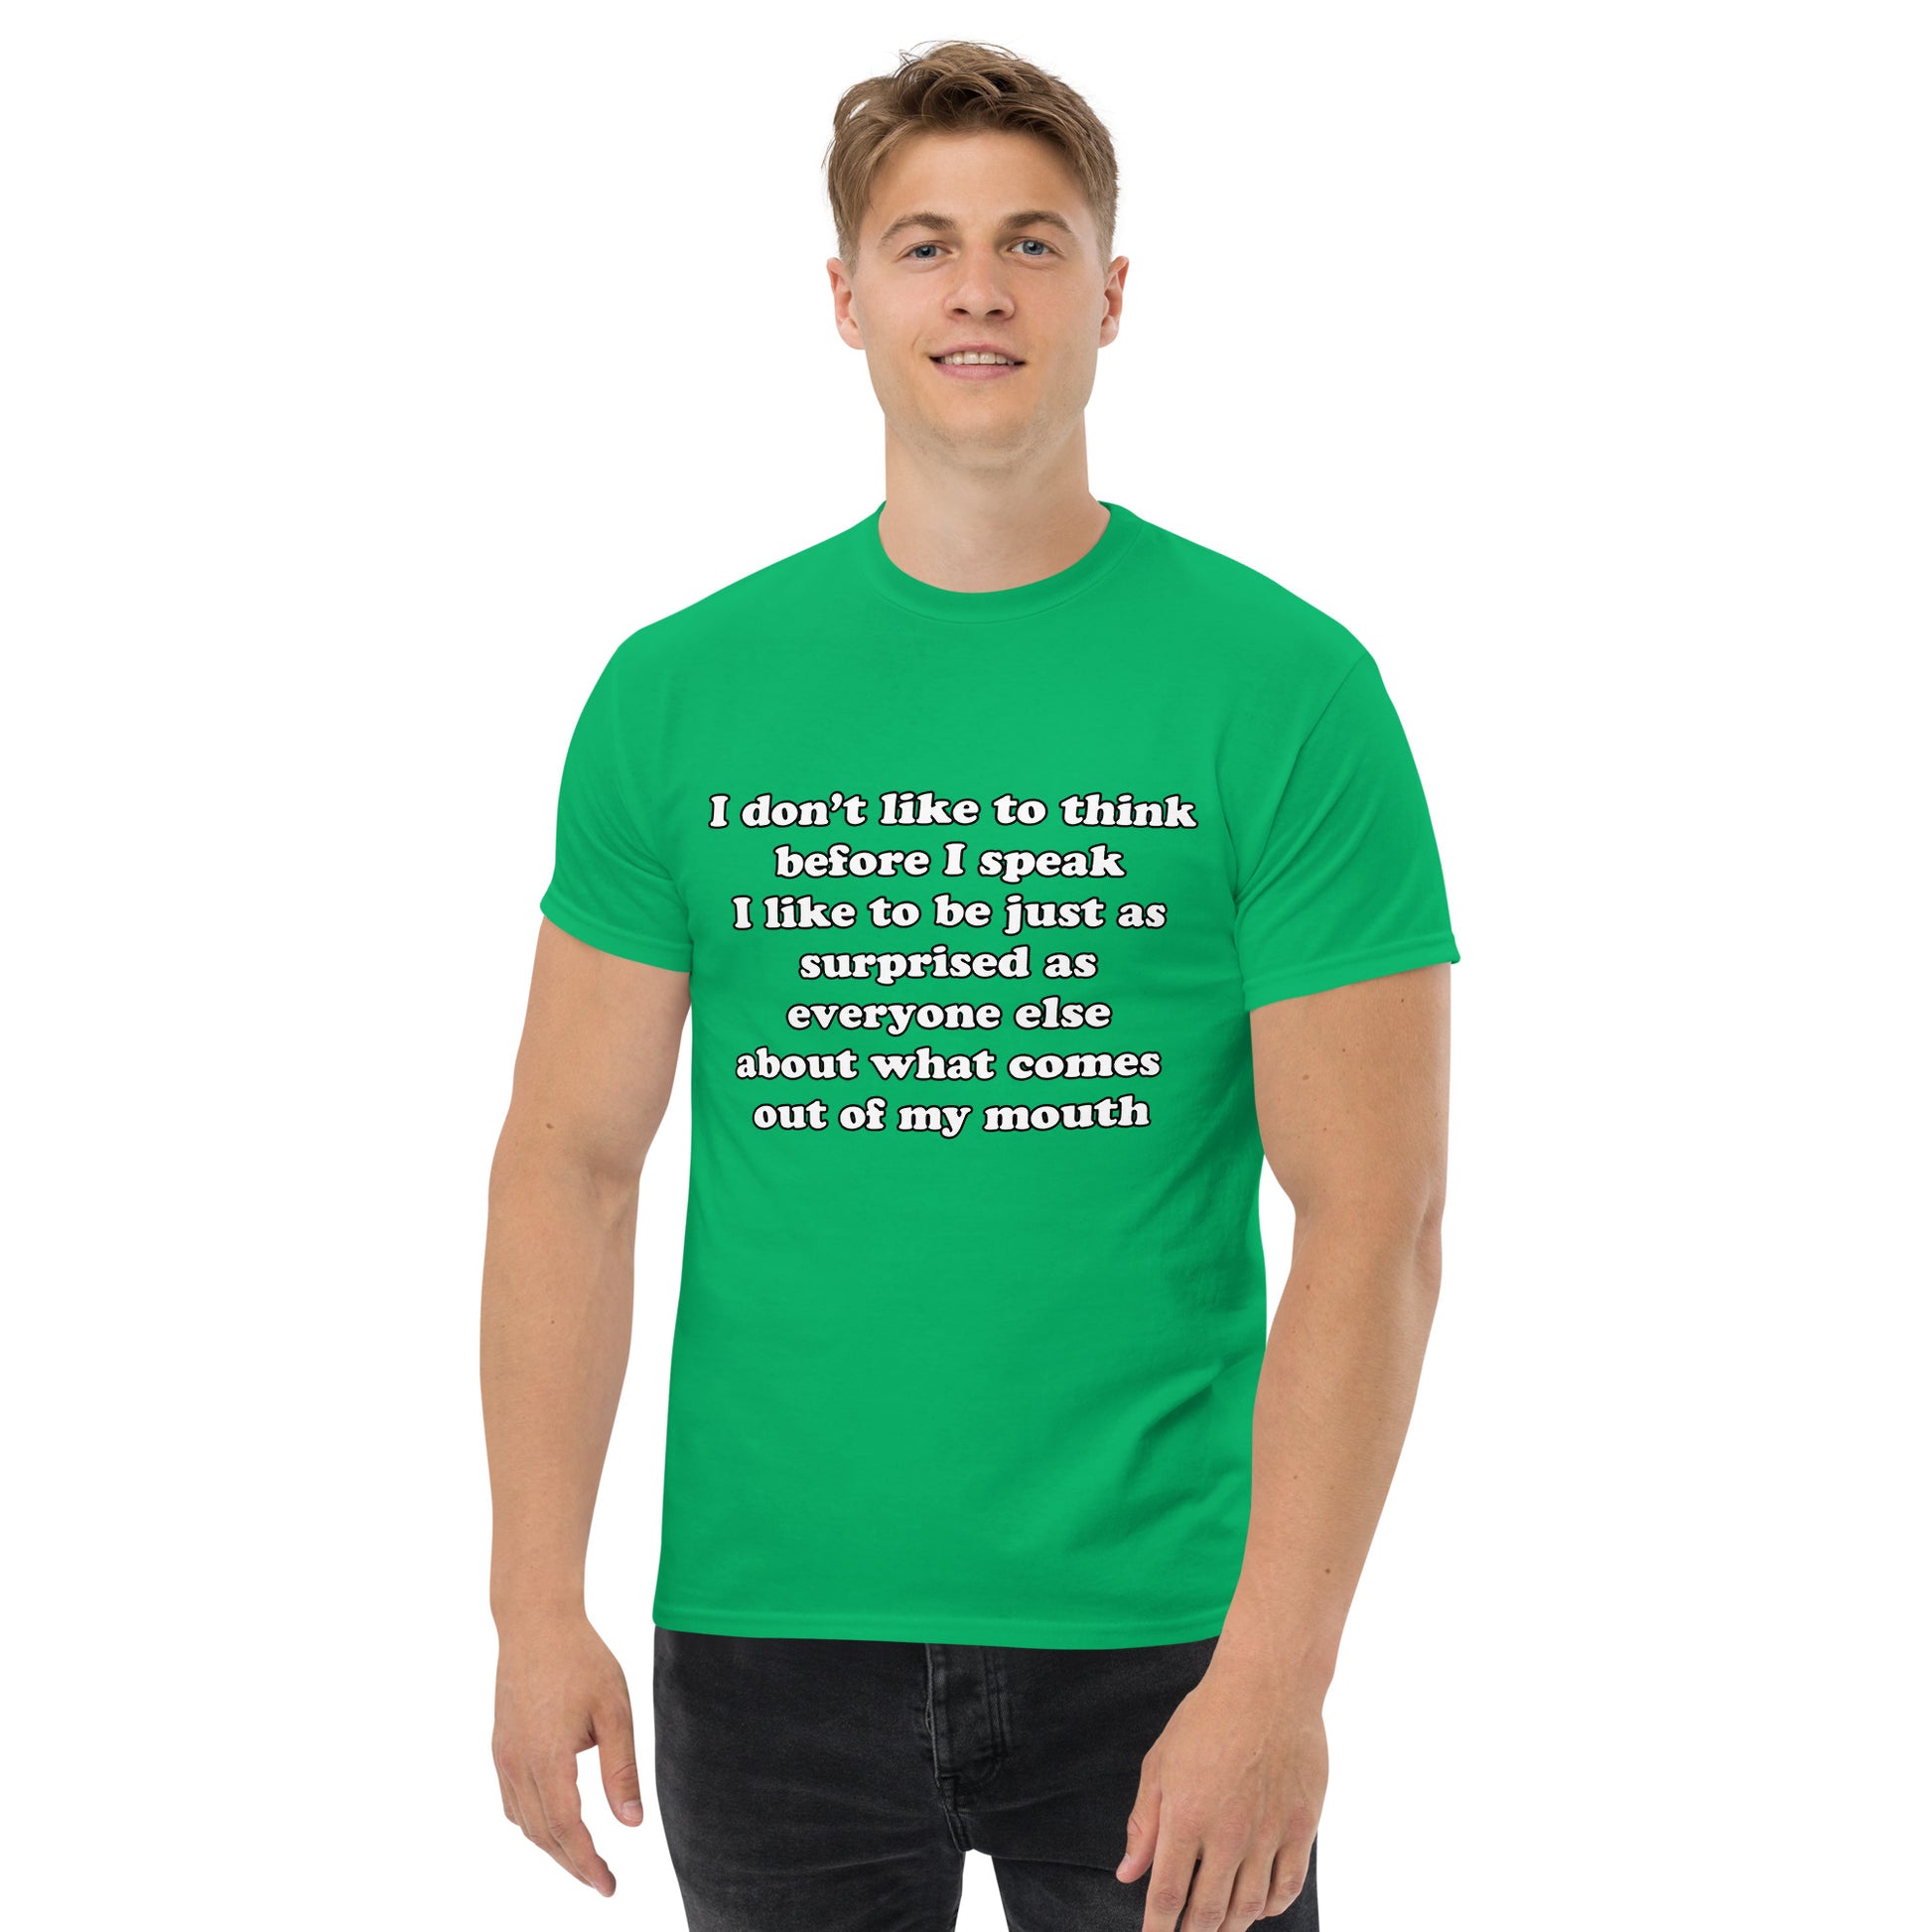 Man with Irish green t-shirt with text “I don't think before I speak Just as serprised as everyone about what comes out of my mouth"